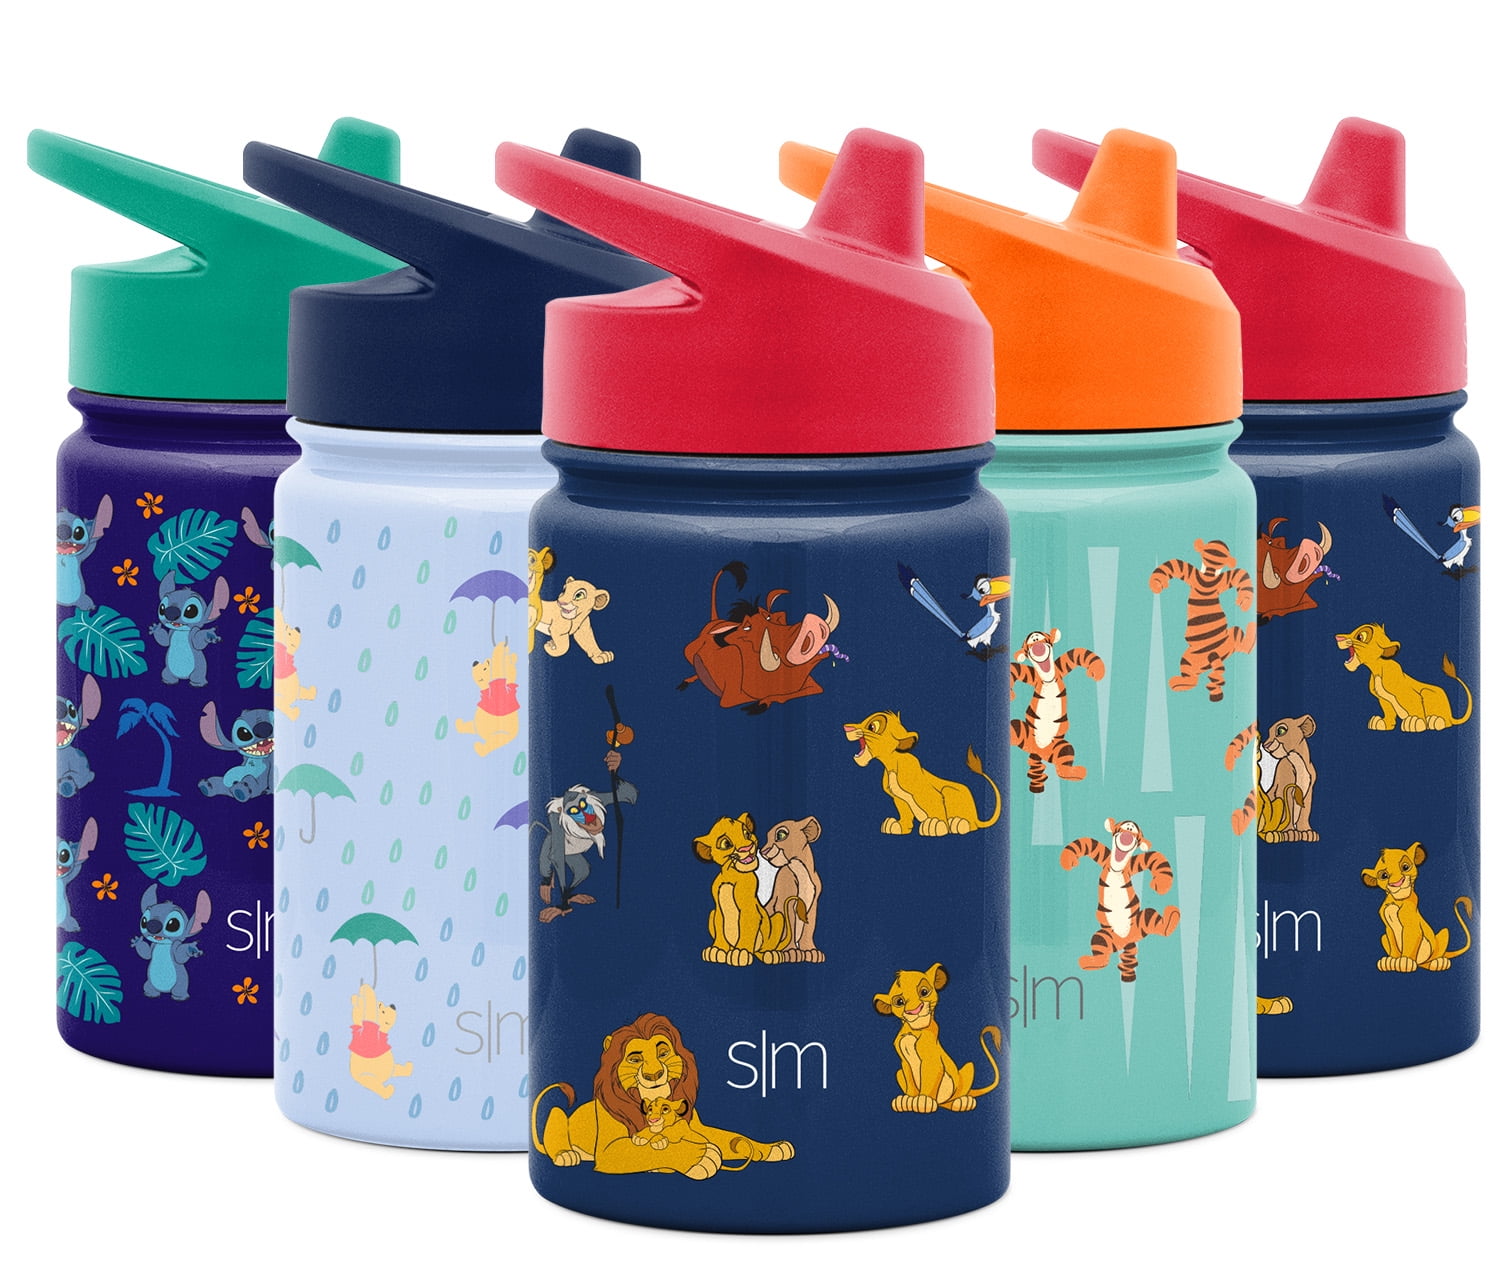 Little Ecos Double Walled Insulated Kids & Toddler Smoothie Cups with Screw Tight Lids and Straws | Best Toddler Sippy Cup for 3 Year Old Spill